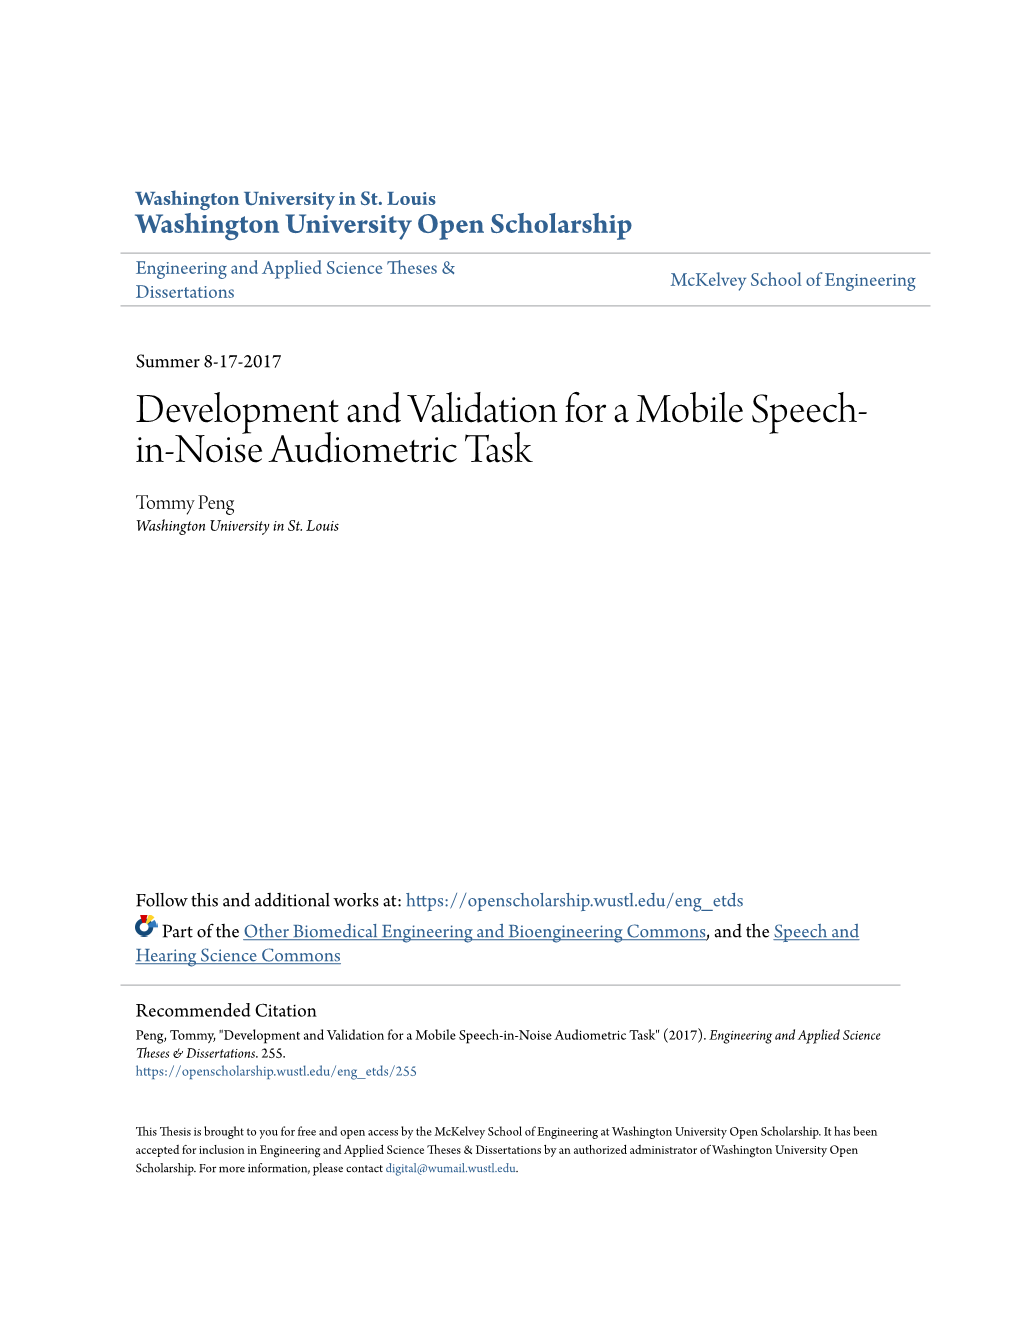 Development and Validation for a Mobile Speech-In-Noise Audiometric Task" (2017)